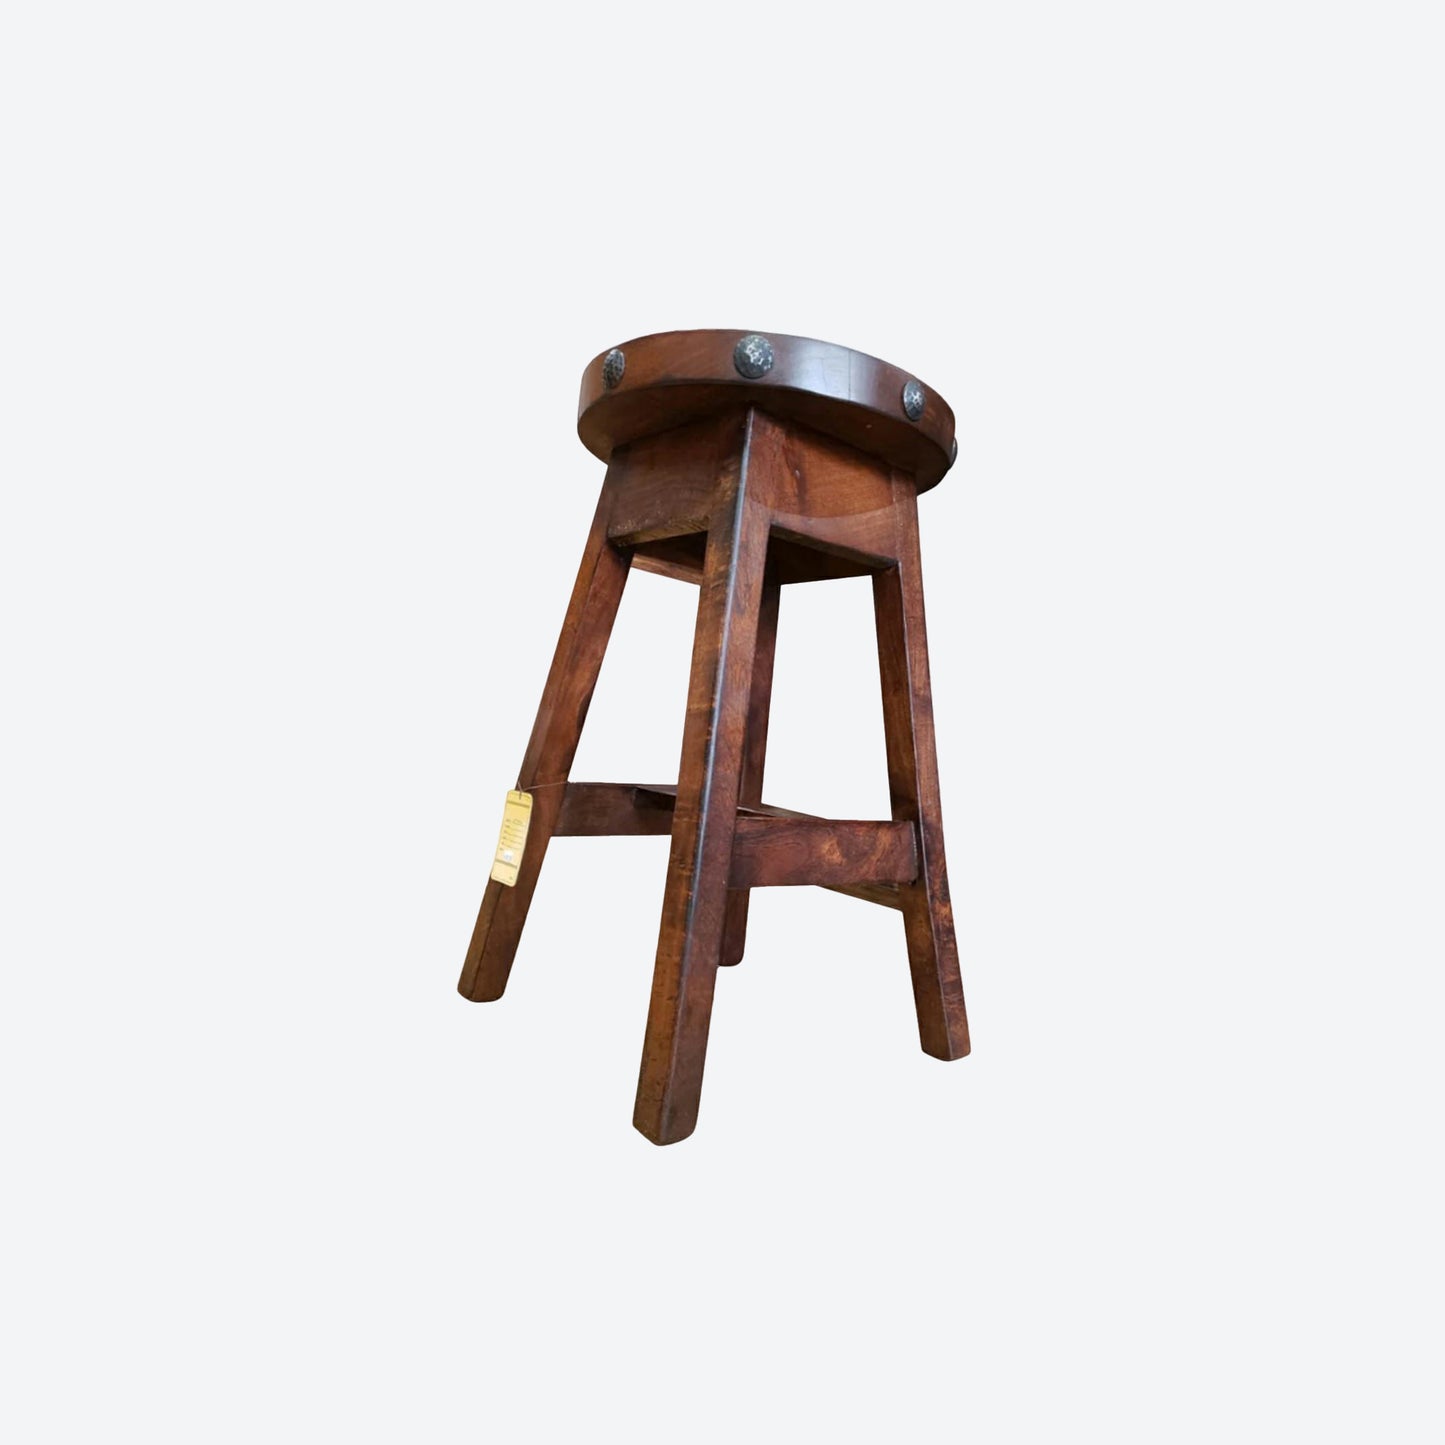 Mesquite WOOD STOOLS WITH HAMMERED ACCENTS  -SK- SKU 1069